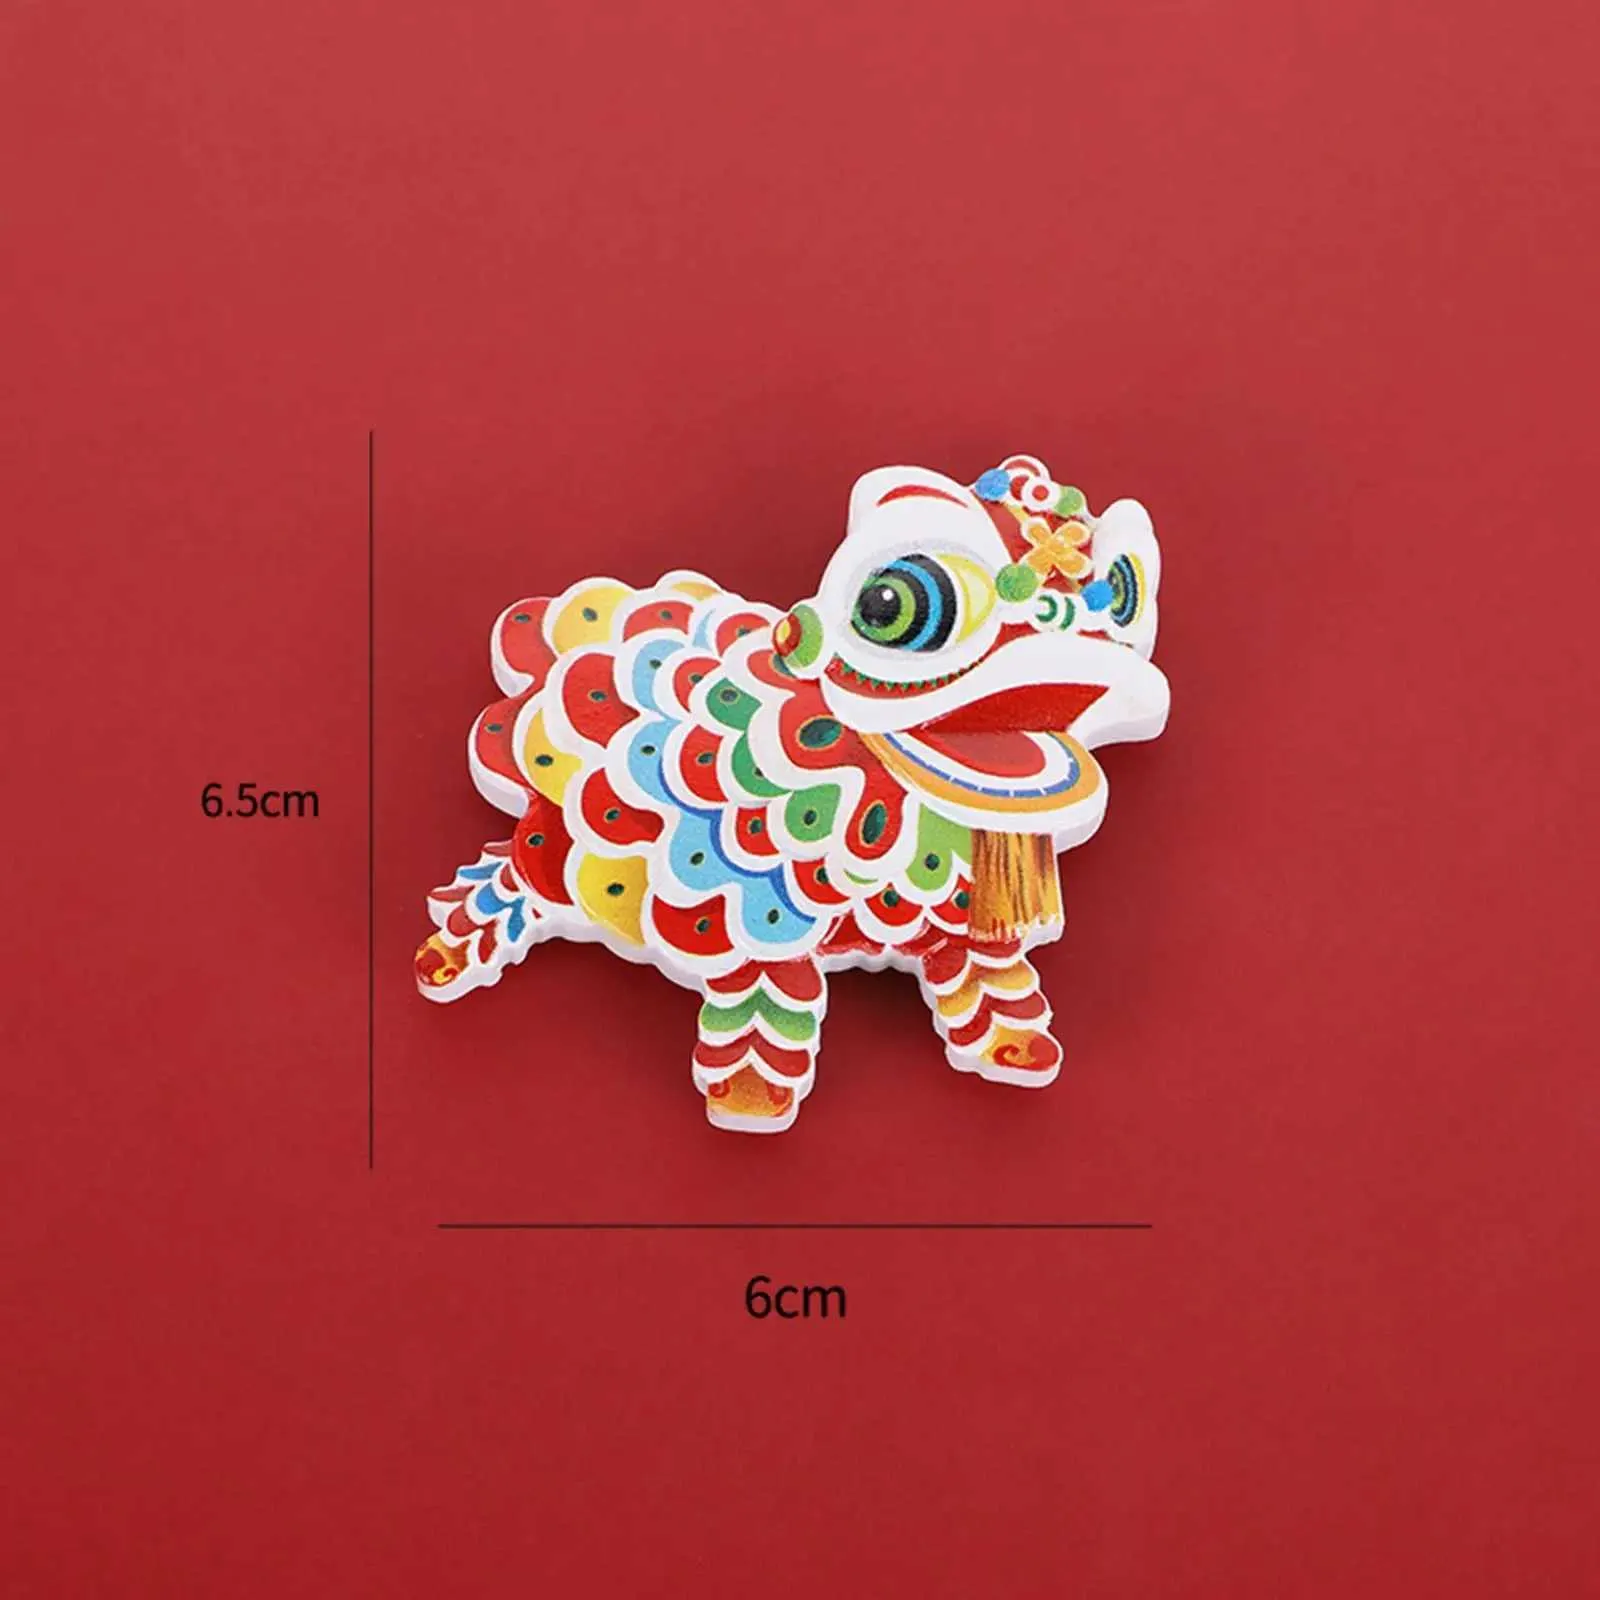 Chinese Lionce Statue Fridge Magnet Lovely Accessories Chinese New Year Resin for DIY Home Decoration Stylish Versatile